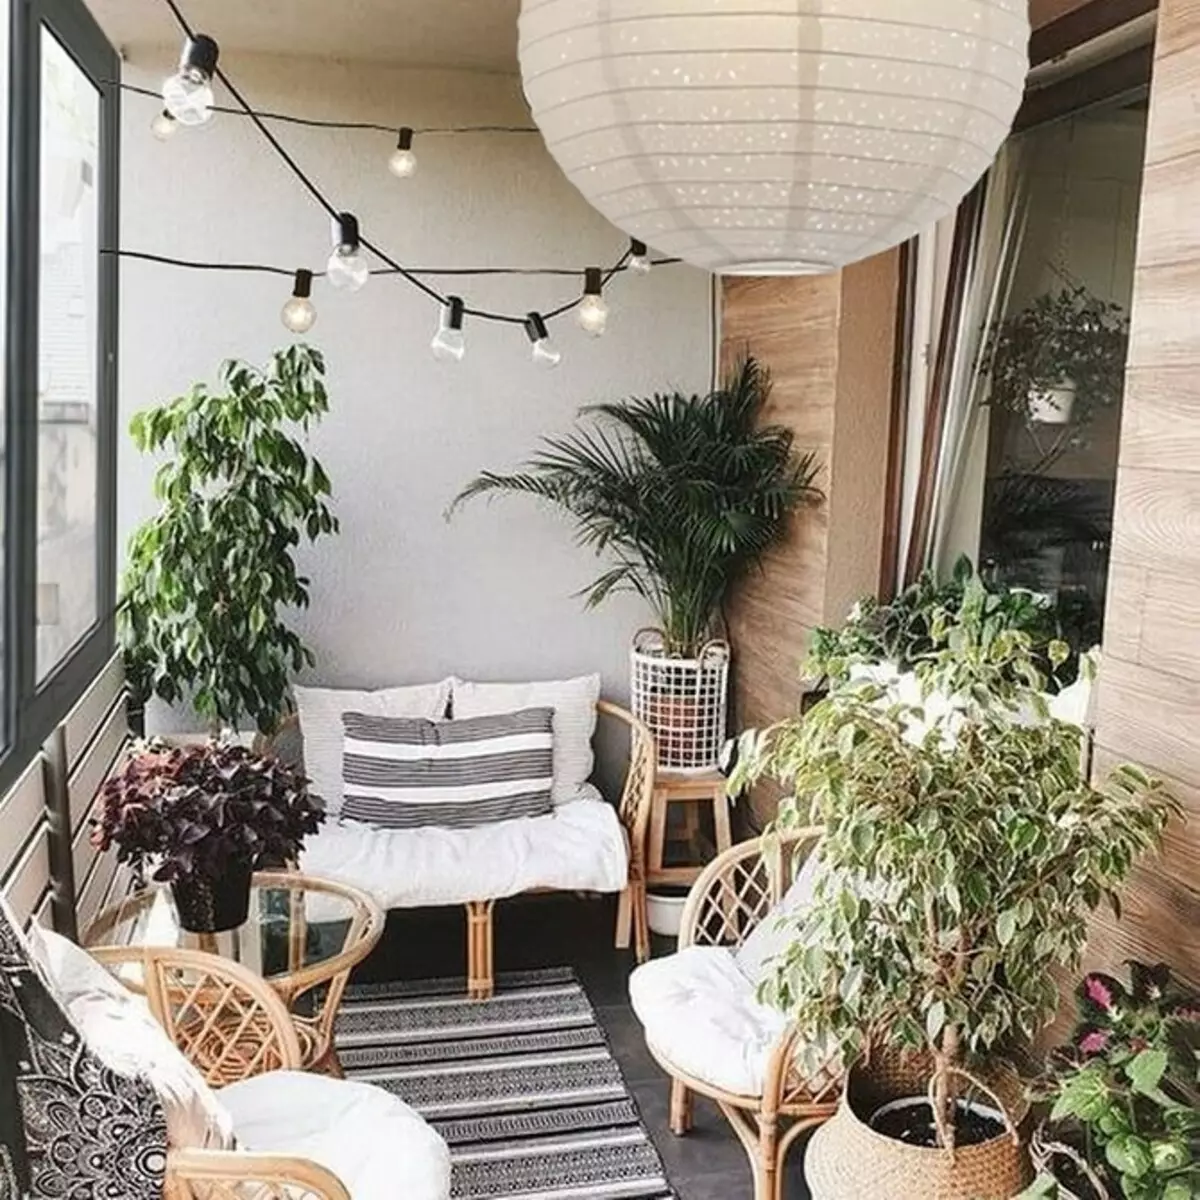 How to create a summer terrace on a city balcony: 7 beautiful and practical ideas 3869_39